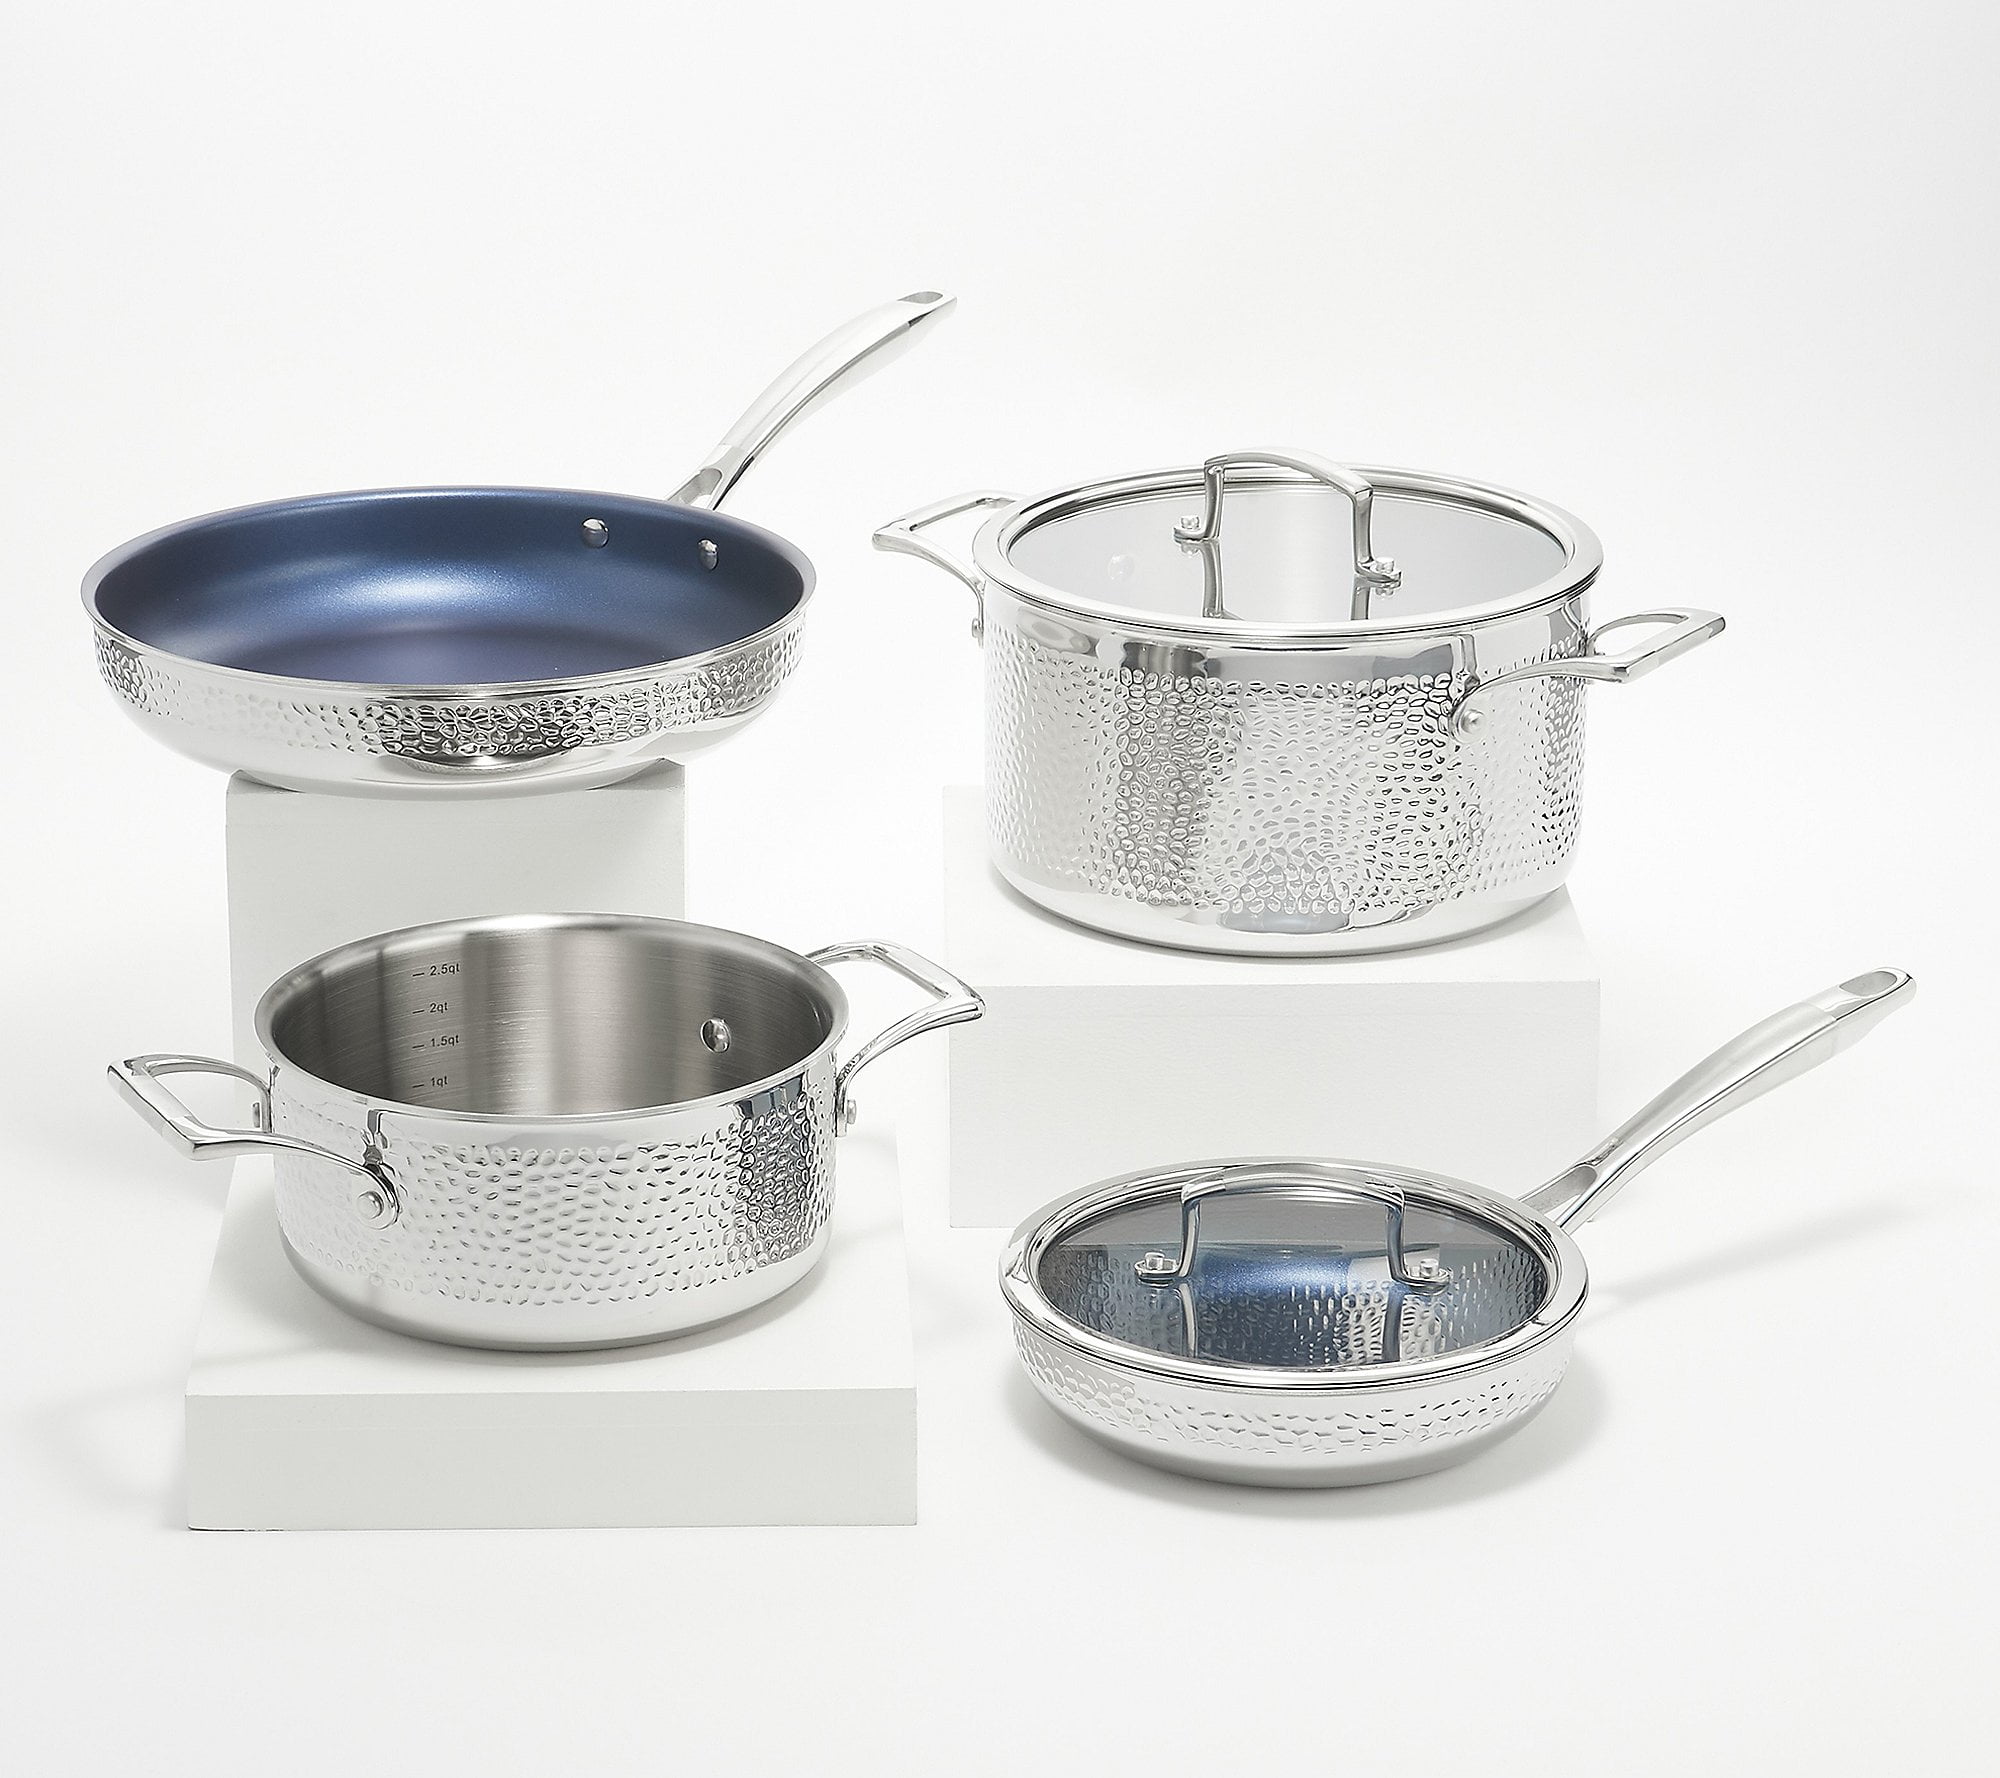  NutriChef 6-Piece Cookware Set Stainless Steel - 3